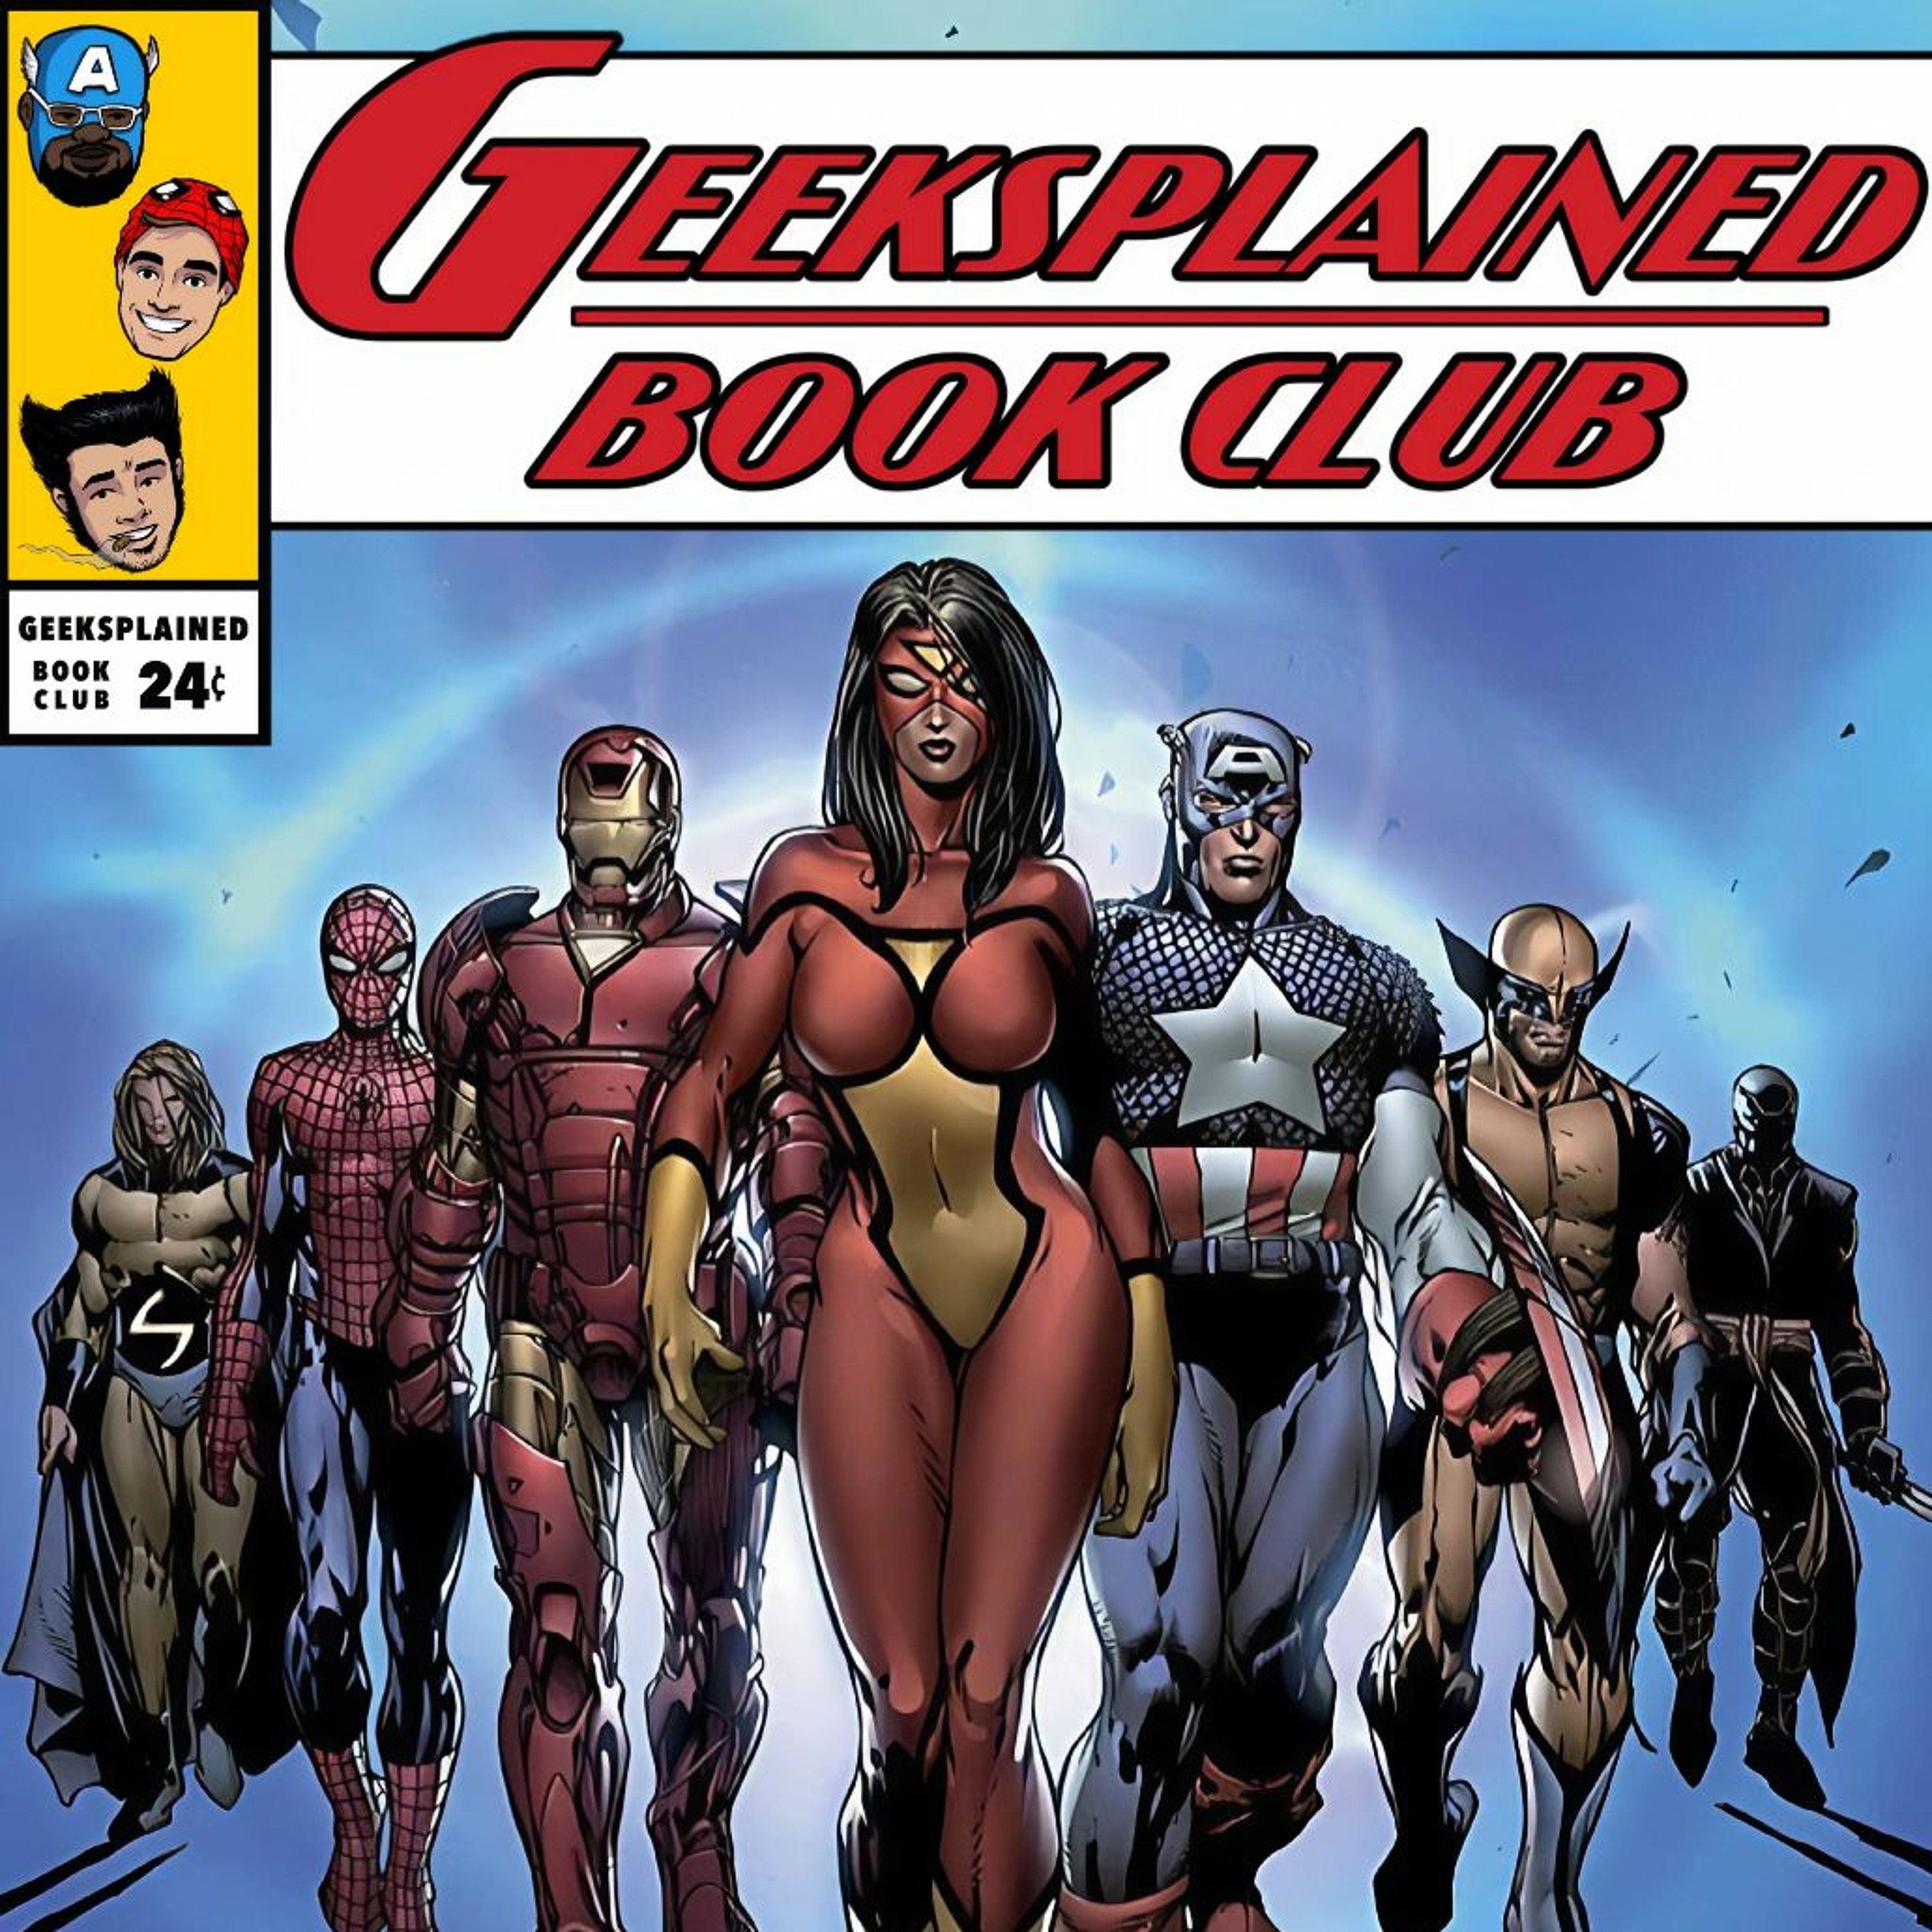 GIANT-SIZED Book Club: Bendis' New Avengers Part 5 (HOUSE OF M)